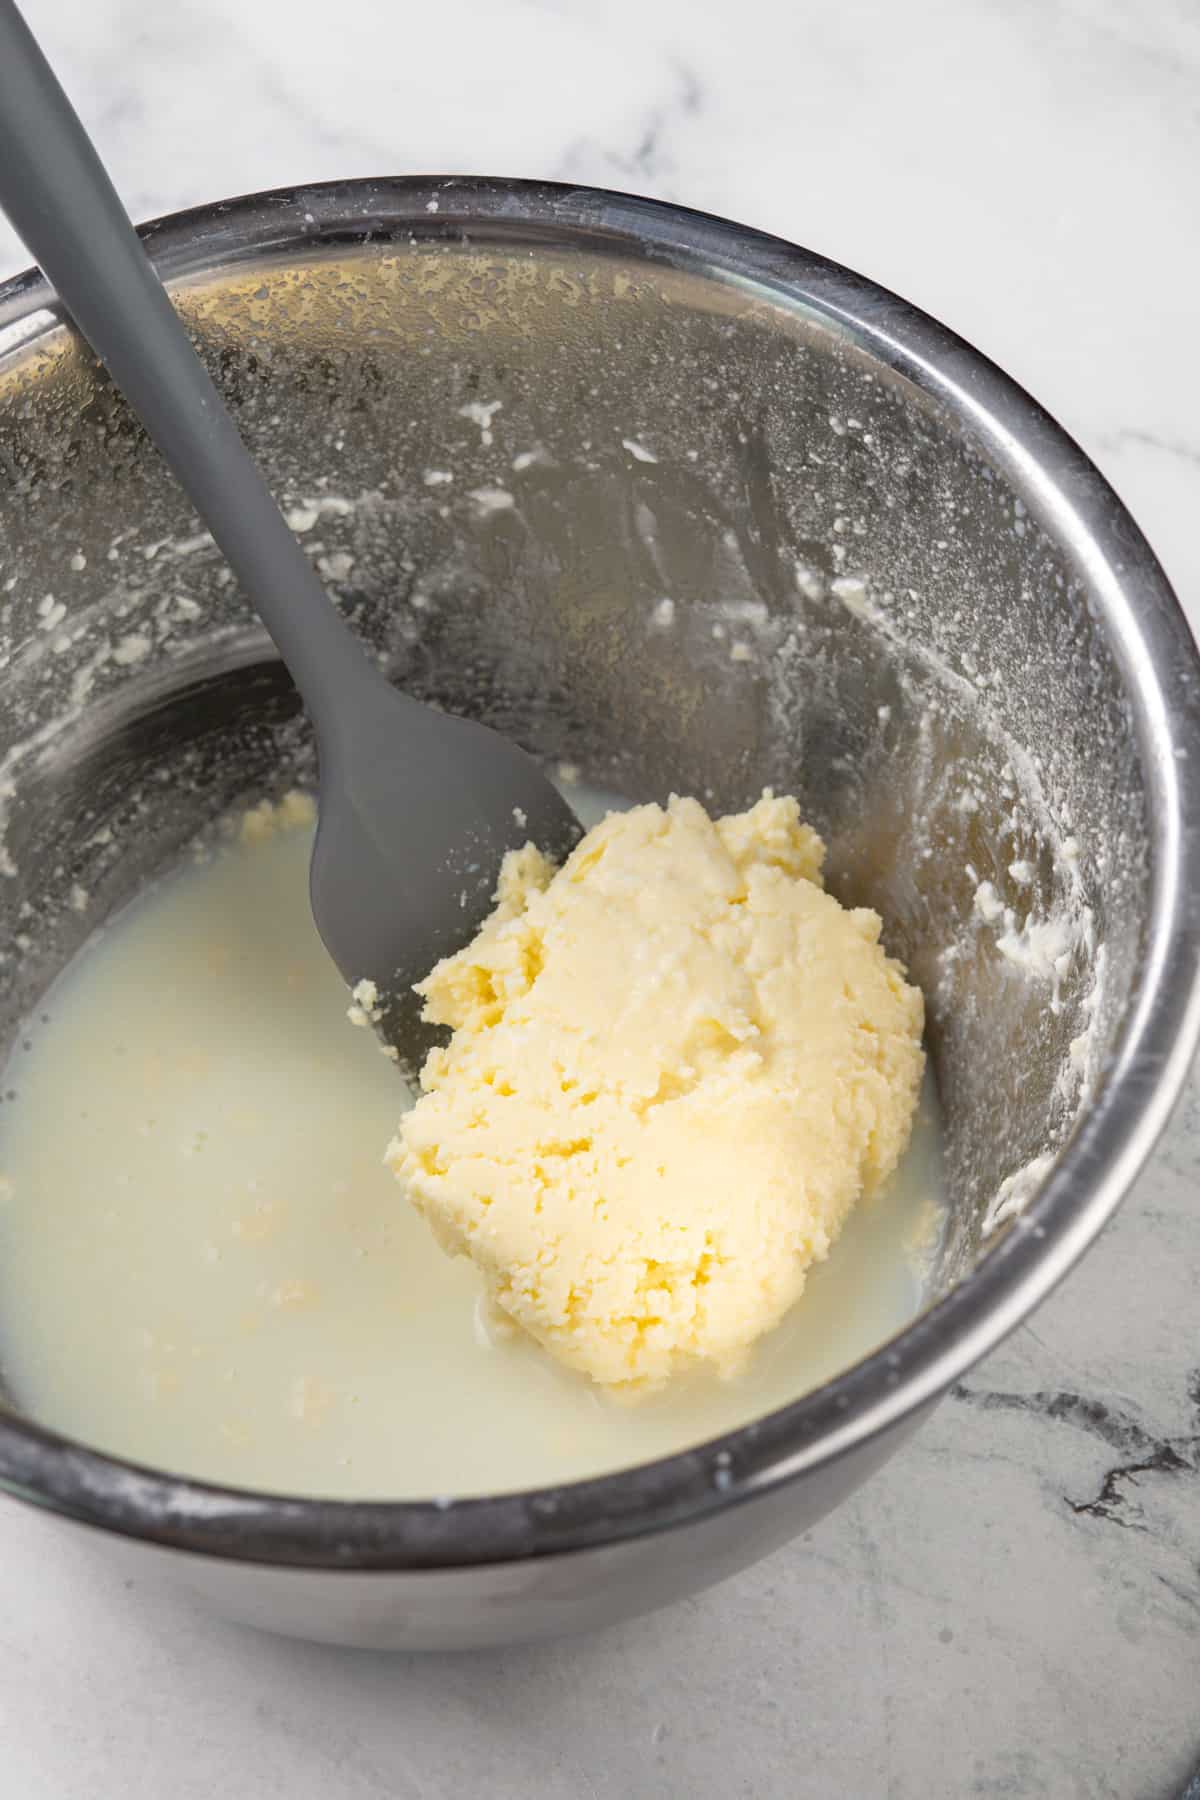 Separated butter and buttermilk in a metal mixing bowl.